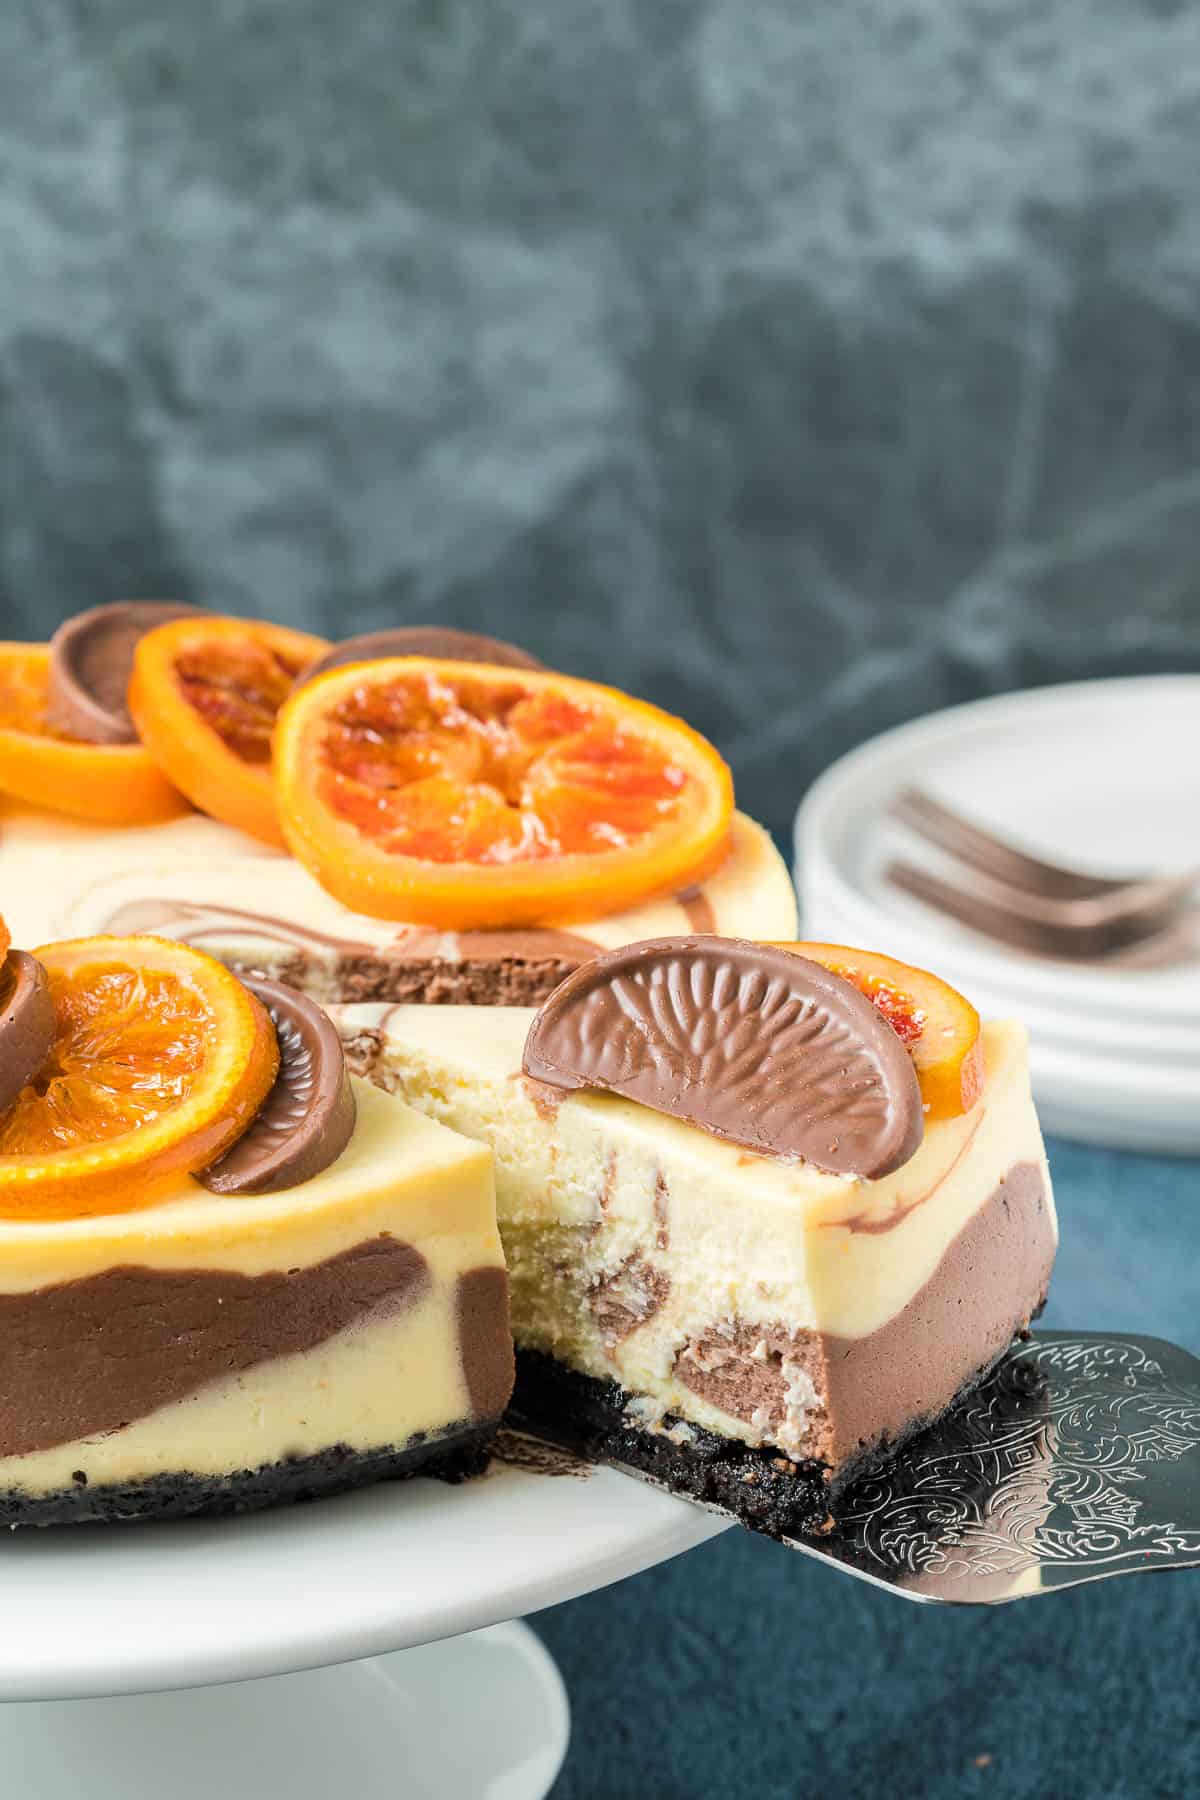 A slice of chocolate orange cheesecake showing the marble interior.